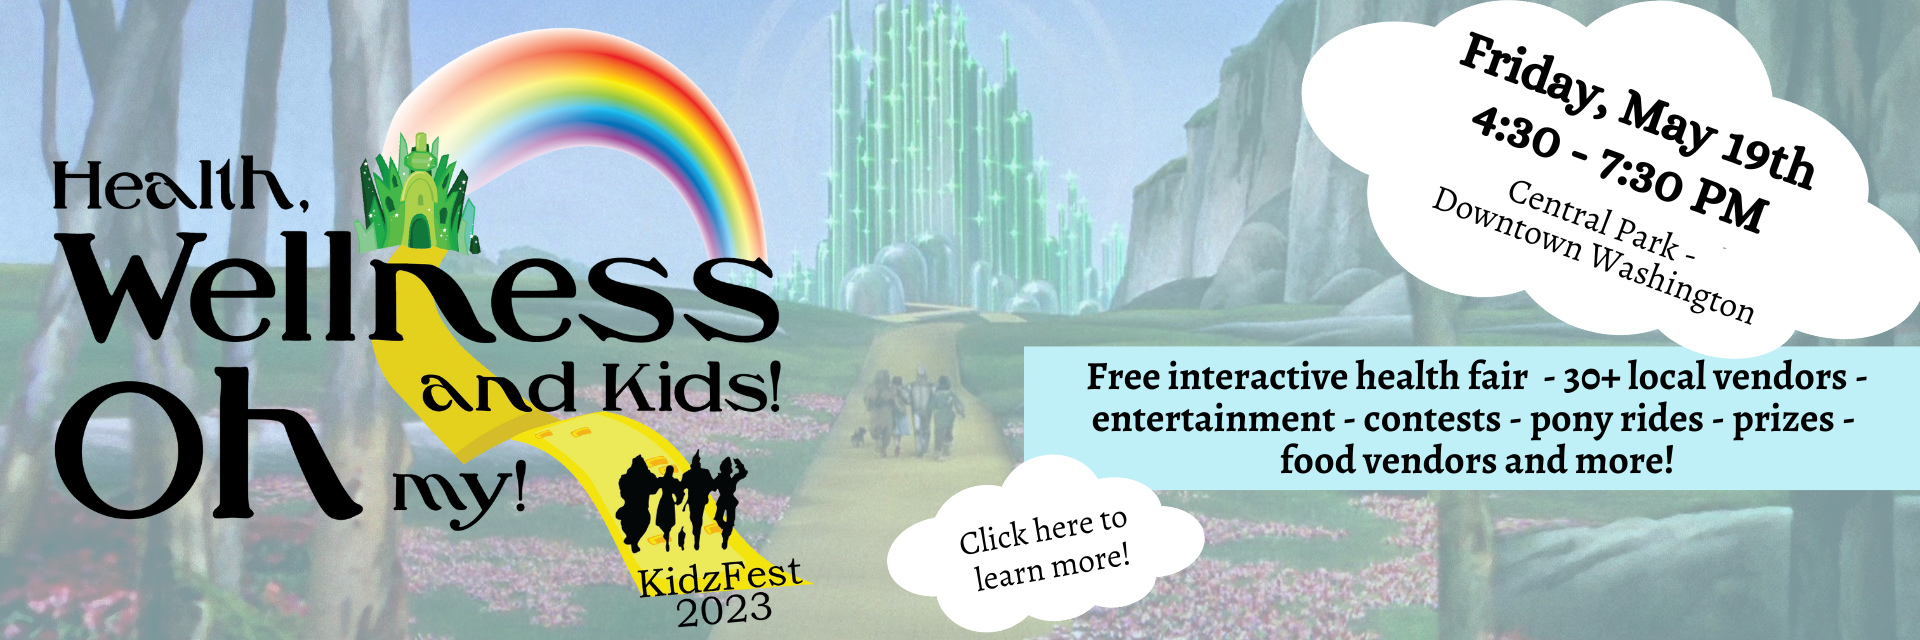 KidzFest Ad Click Here to Learn More